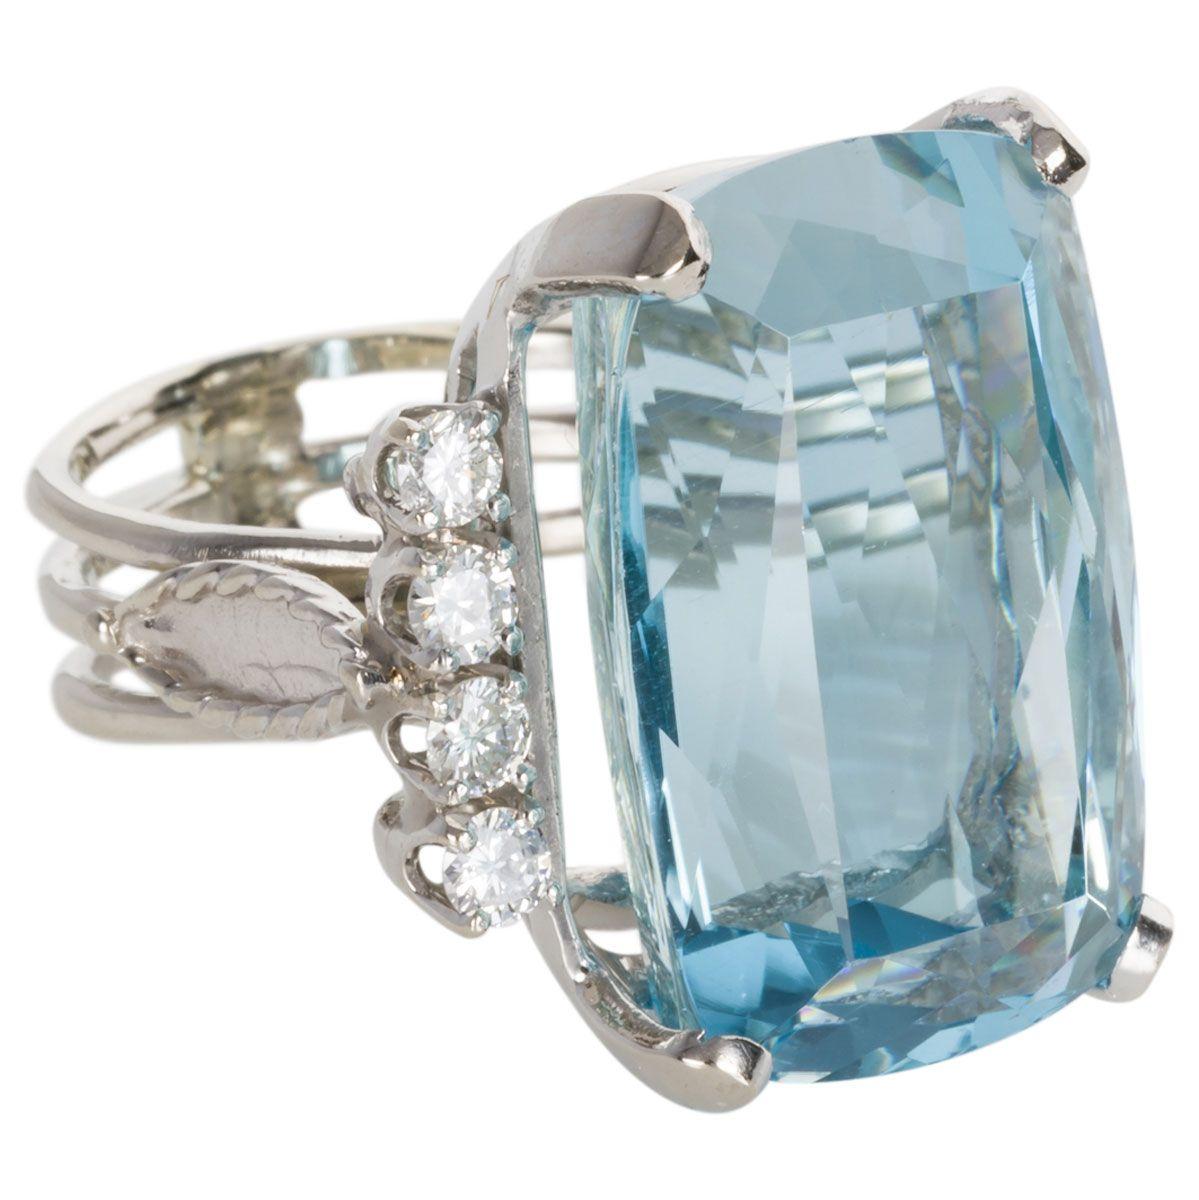 This ring is for the lovers of all things BIG and beautiful. A fabulous cocktail ring with its striking central emerald cut aquamarine with rounded corners - beautifully set in 14k white gold with a sprinkling of white diamonds to add an extra touch